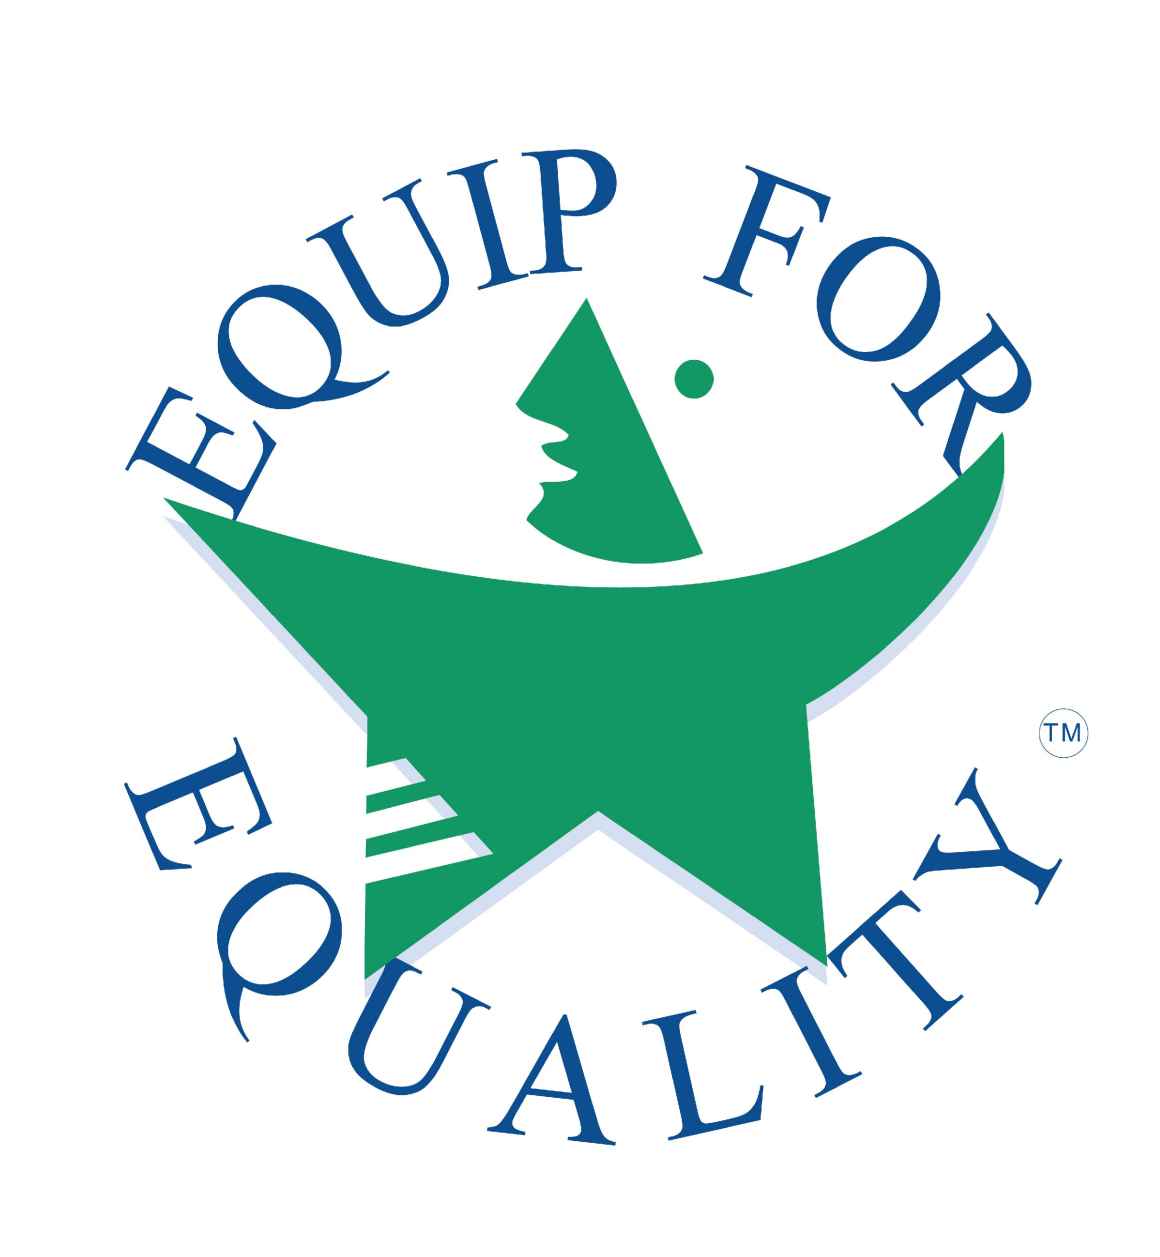 Green star logo with blue text in a circle around: EQUIP FOR EQUALITY